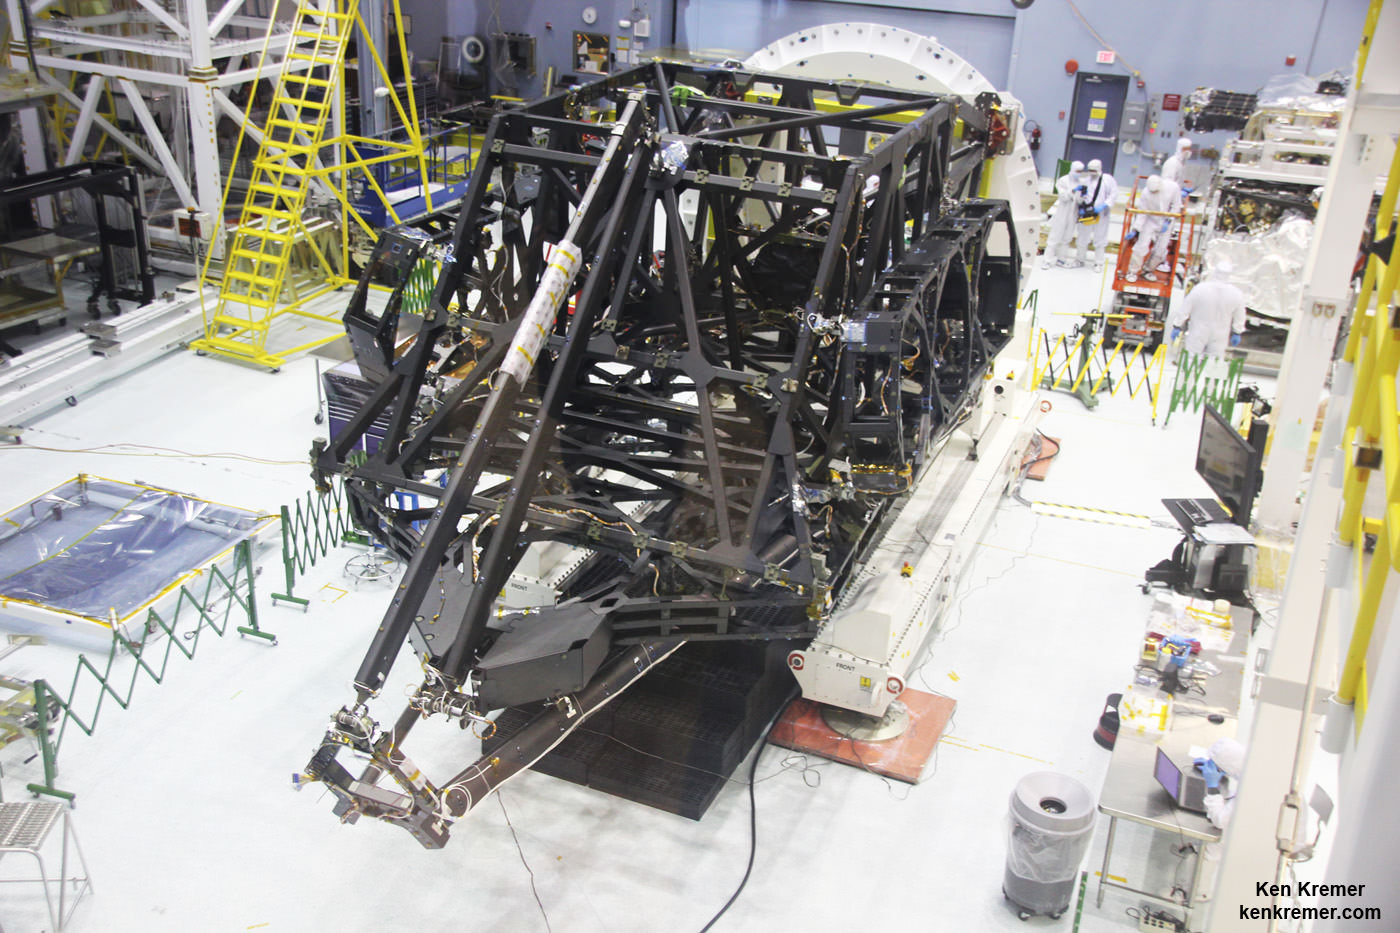 View showing actual flight structure of mirror backplane unit for NASA's James Webb Space Telescope (JWST) that holds 18 segment primary mirror array and secondary mirror mount at front, in stowed-for-launch configuration.  JWST is being assembled here by technicians inside the world’s largest cleanroom at NASA Goddard Space Flight Center, Greenbelt, Md.  Credit: Ken Kremer/kenkremer.com